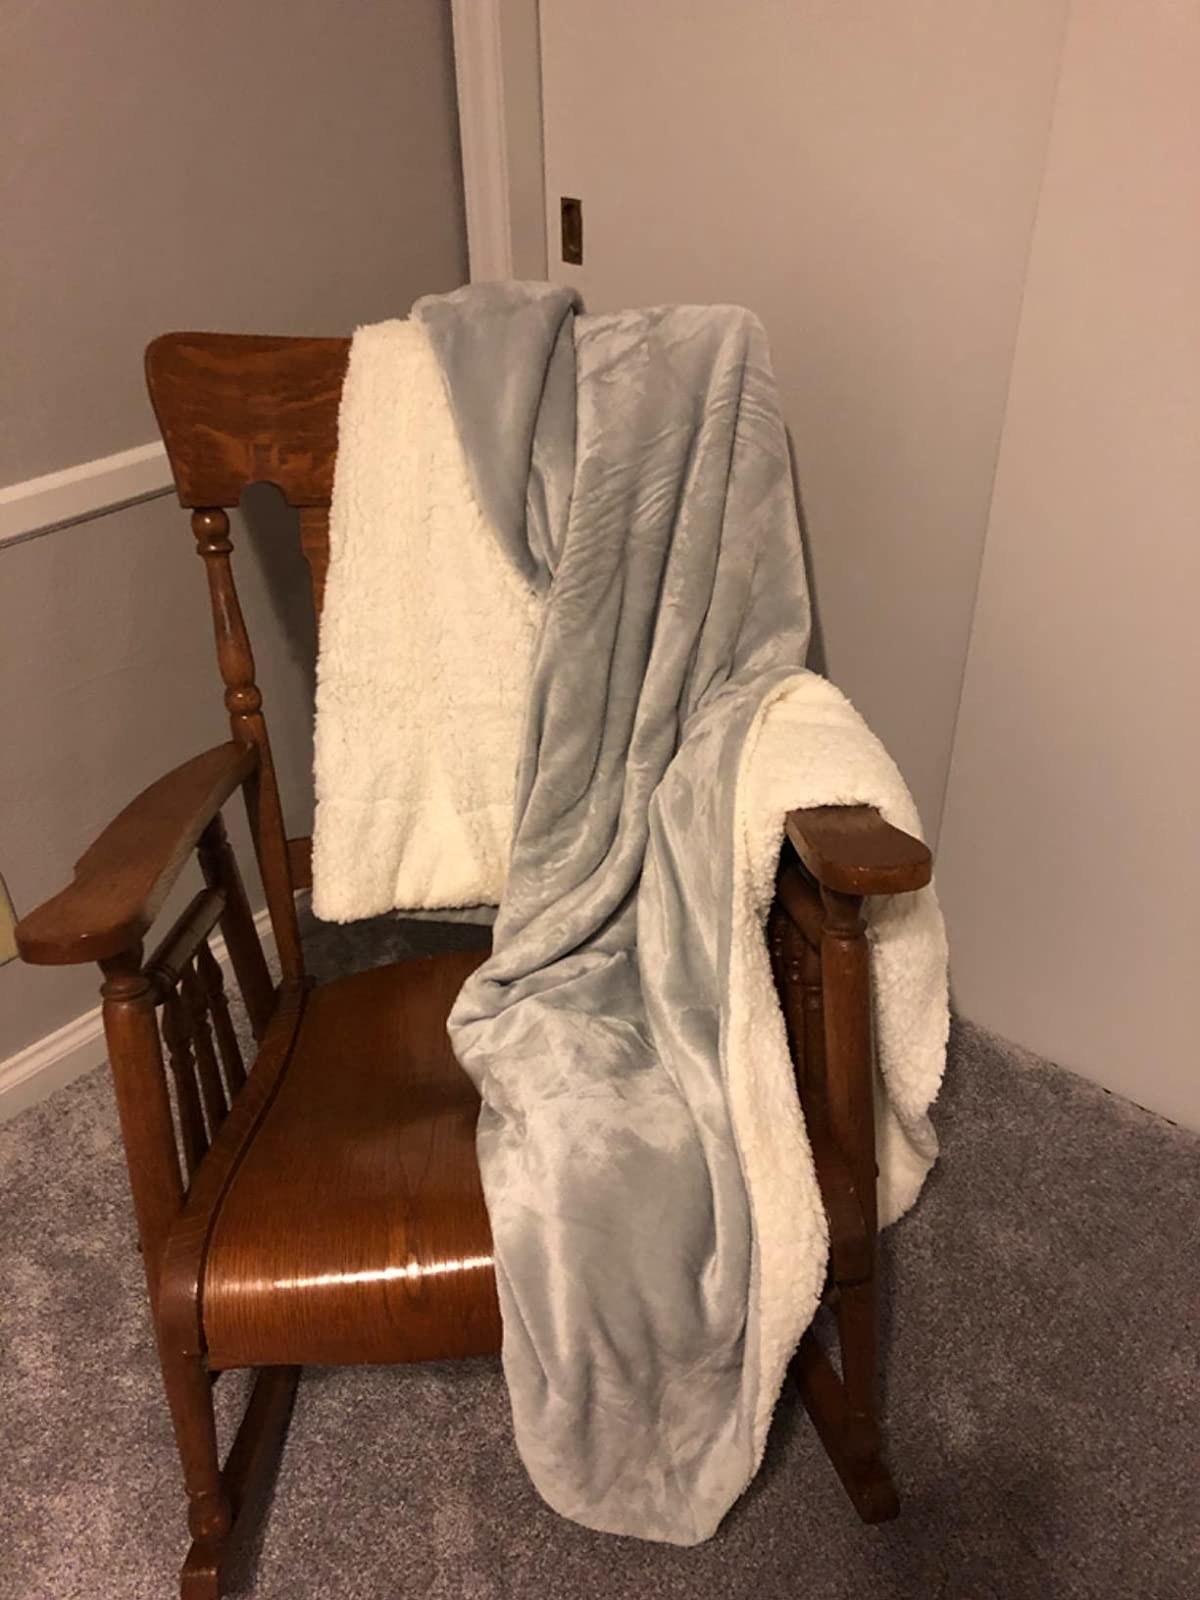 Reviewer image of the gray blanket on a rocking chair